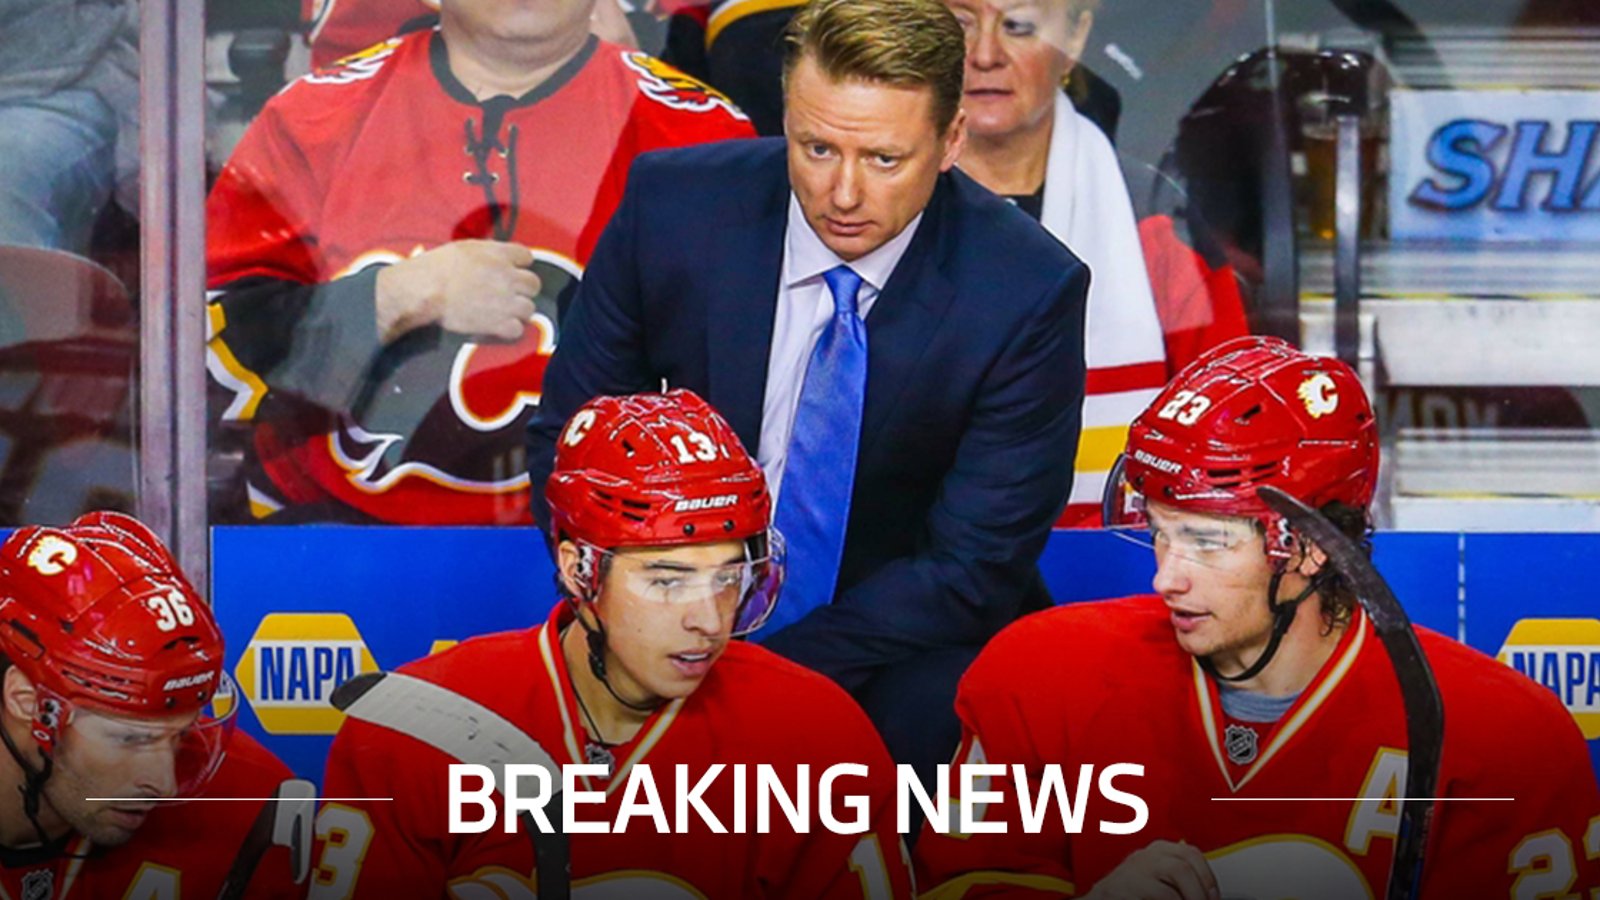 Breaking news: Flames forward out with broken jaw